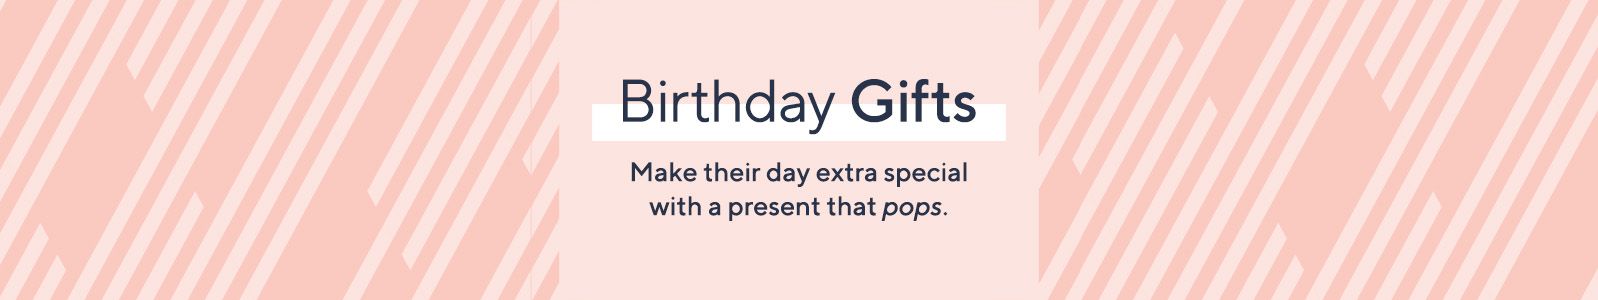 Birthday Gifts Make their day extra special with a present that pops.